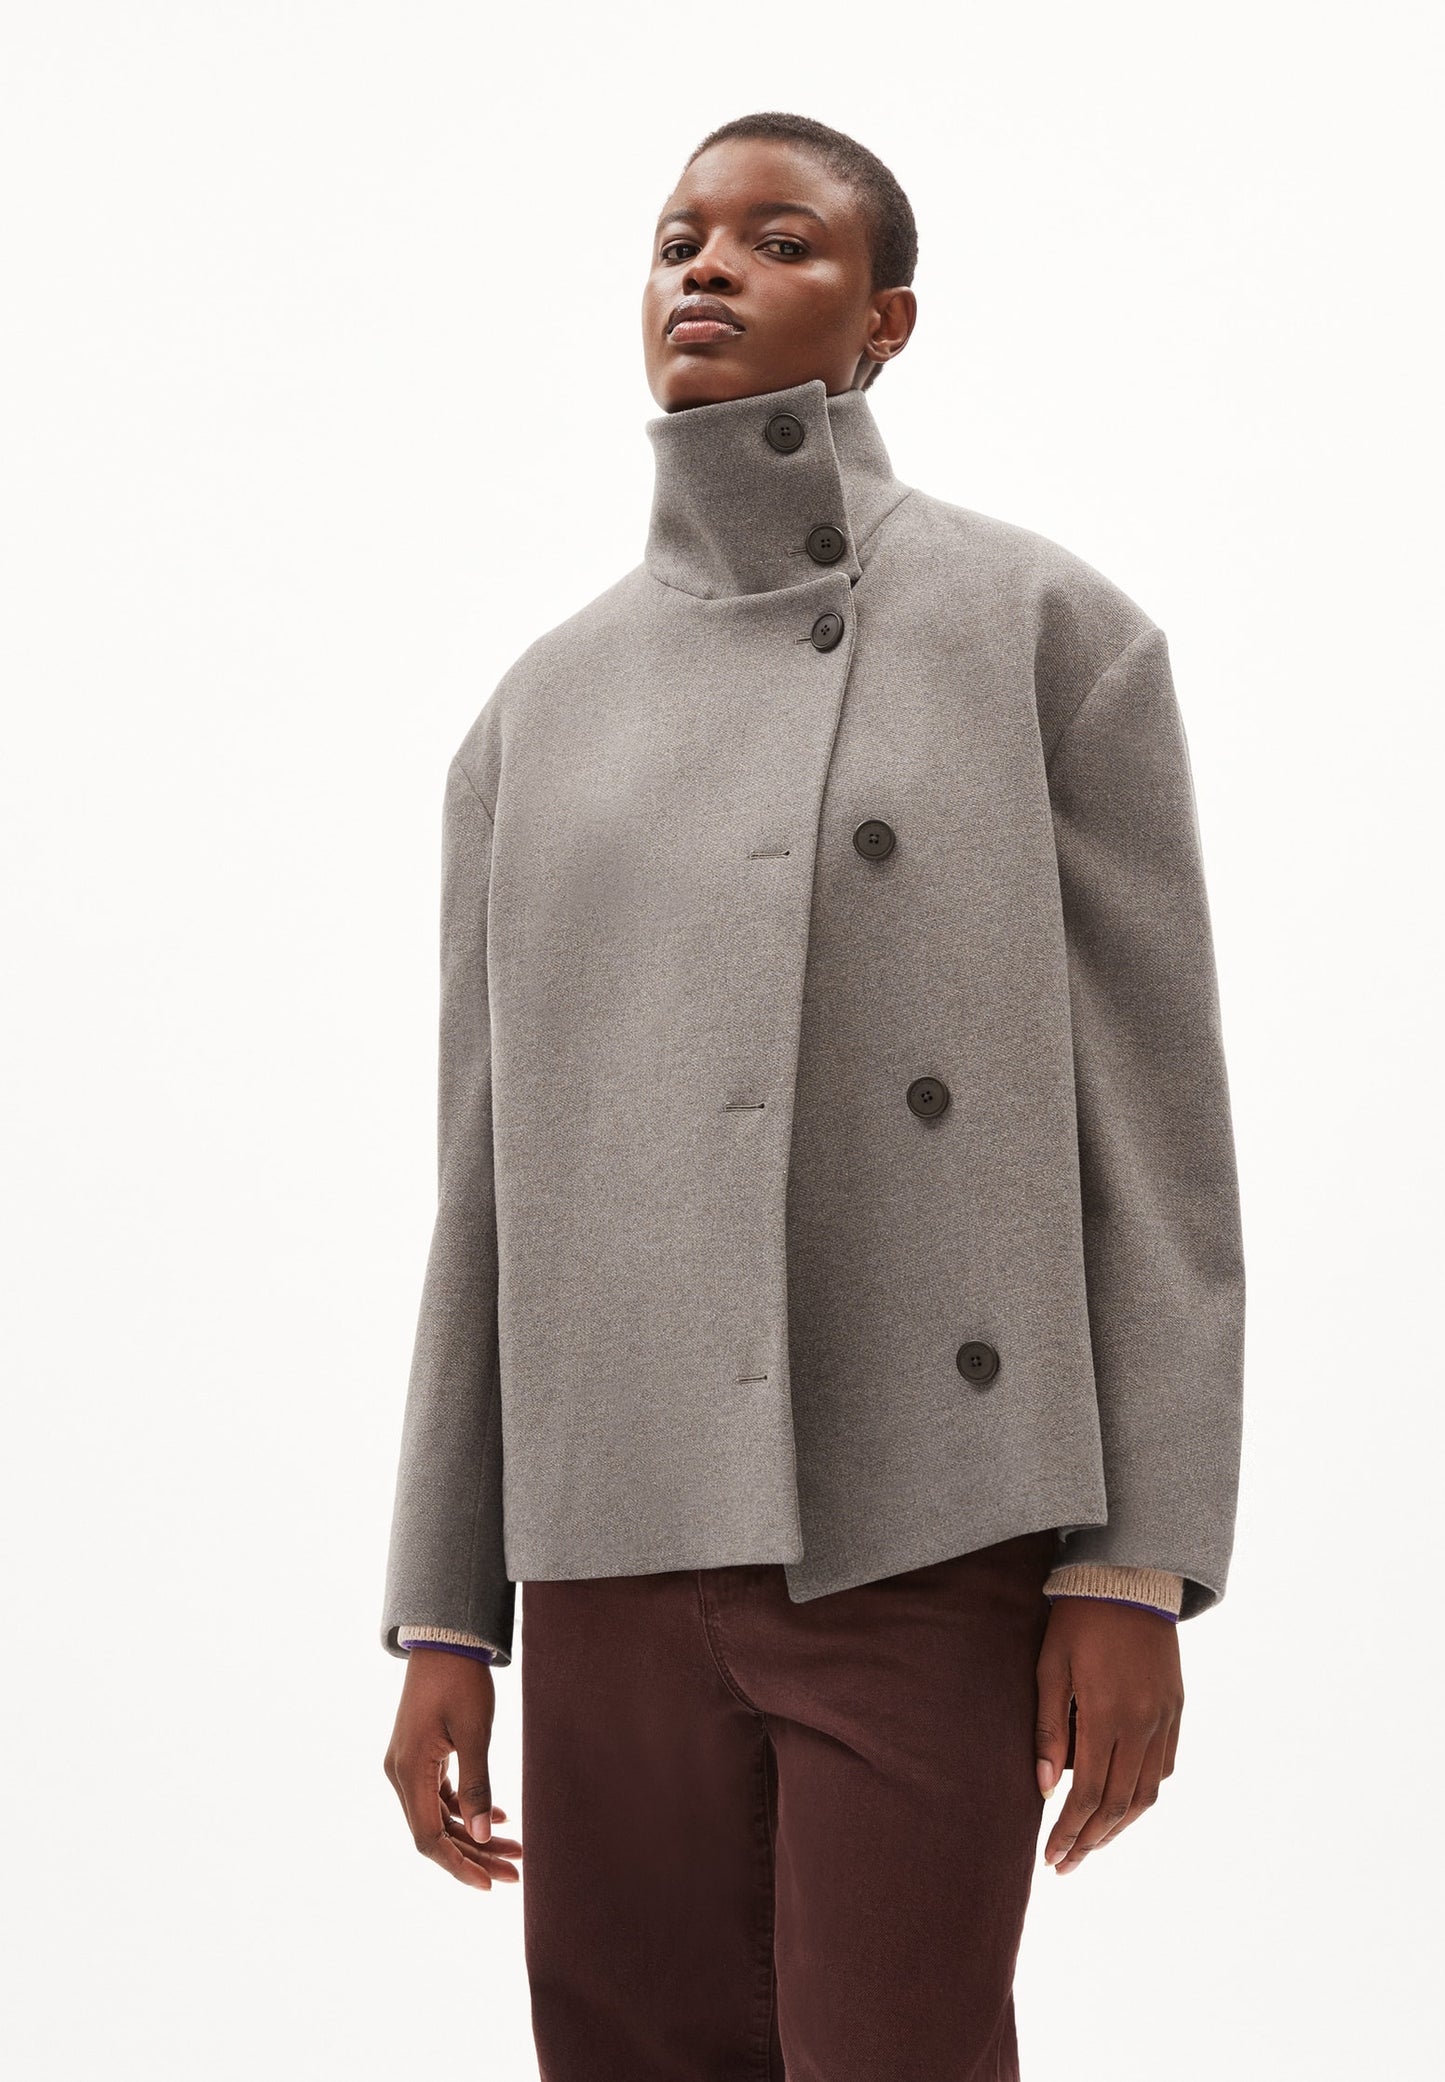 MAJELAA
COAT RELAXED FIT MADE OF RECYCLED WOOL